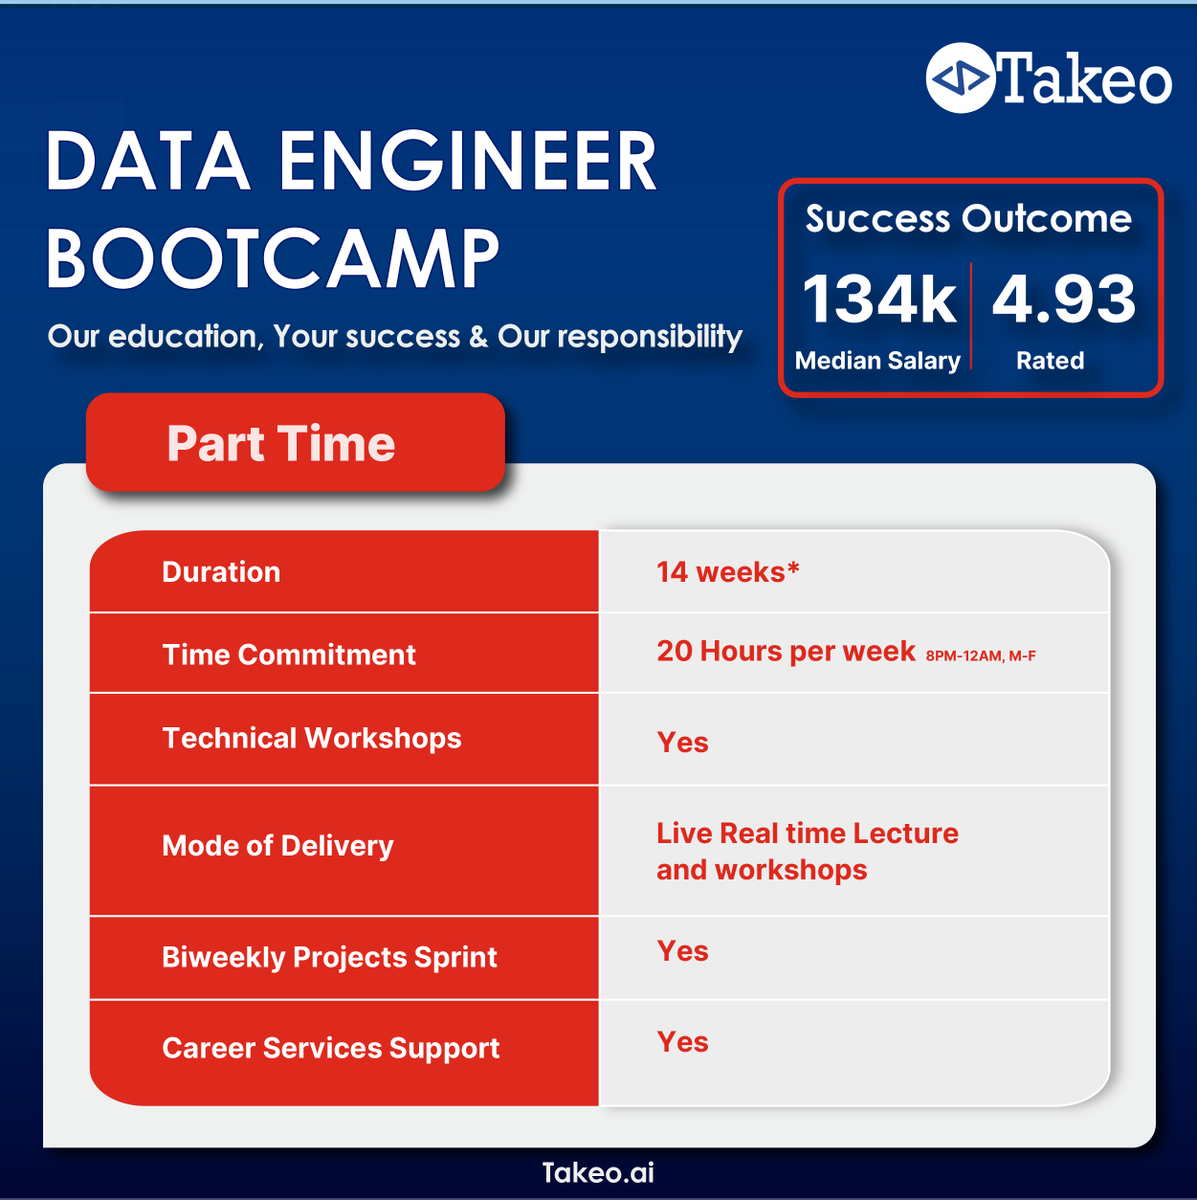 'Turn Your Passion for Data into a Rewarding Career with our Data Engineer Bootcamp! 💼🔥'

To Apply: takeo.ai/data-engineer-…

#dataengineering #dataengineer #datascience #bigdata #machinelearning #ai #tech #careers #education #canada #usa #earnmoney